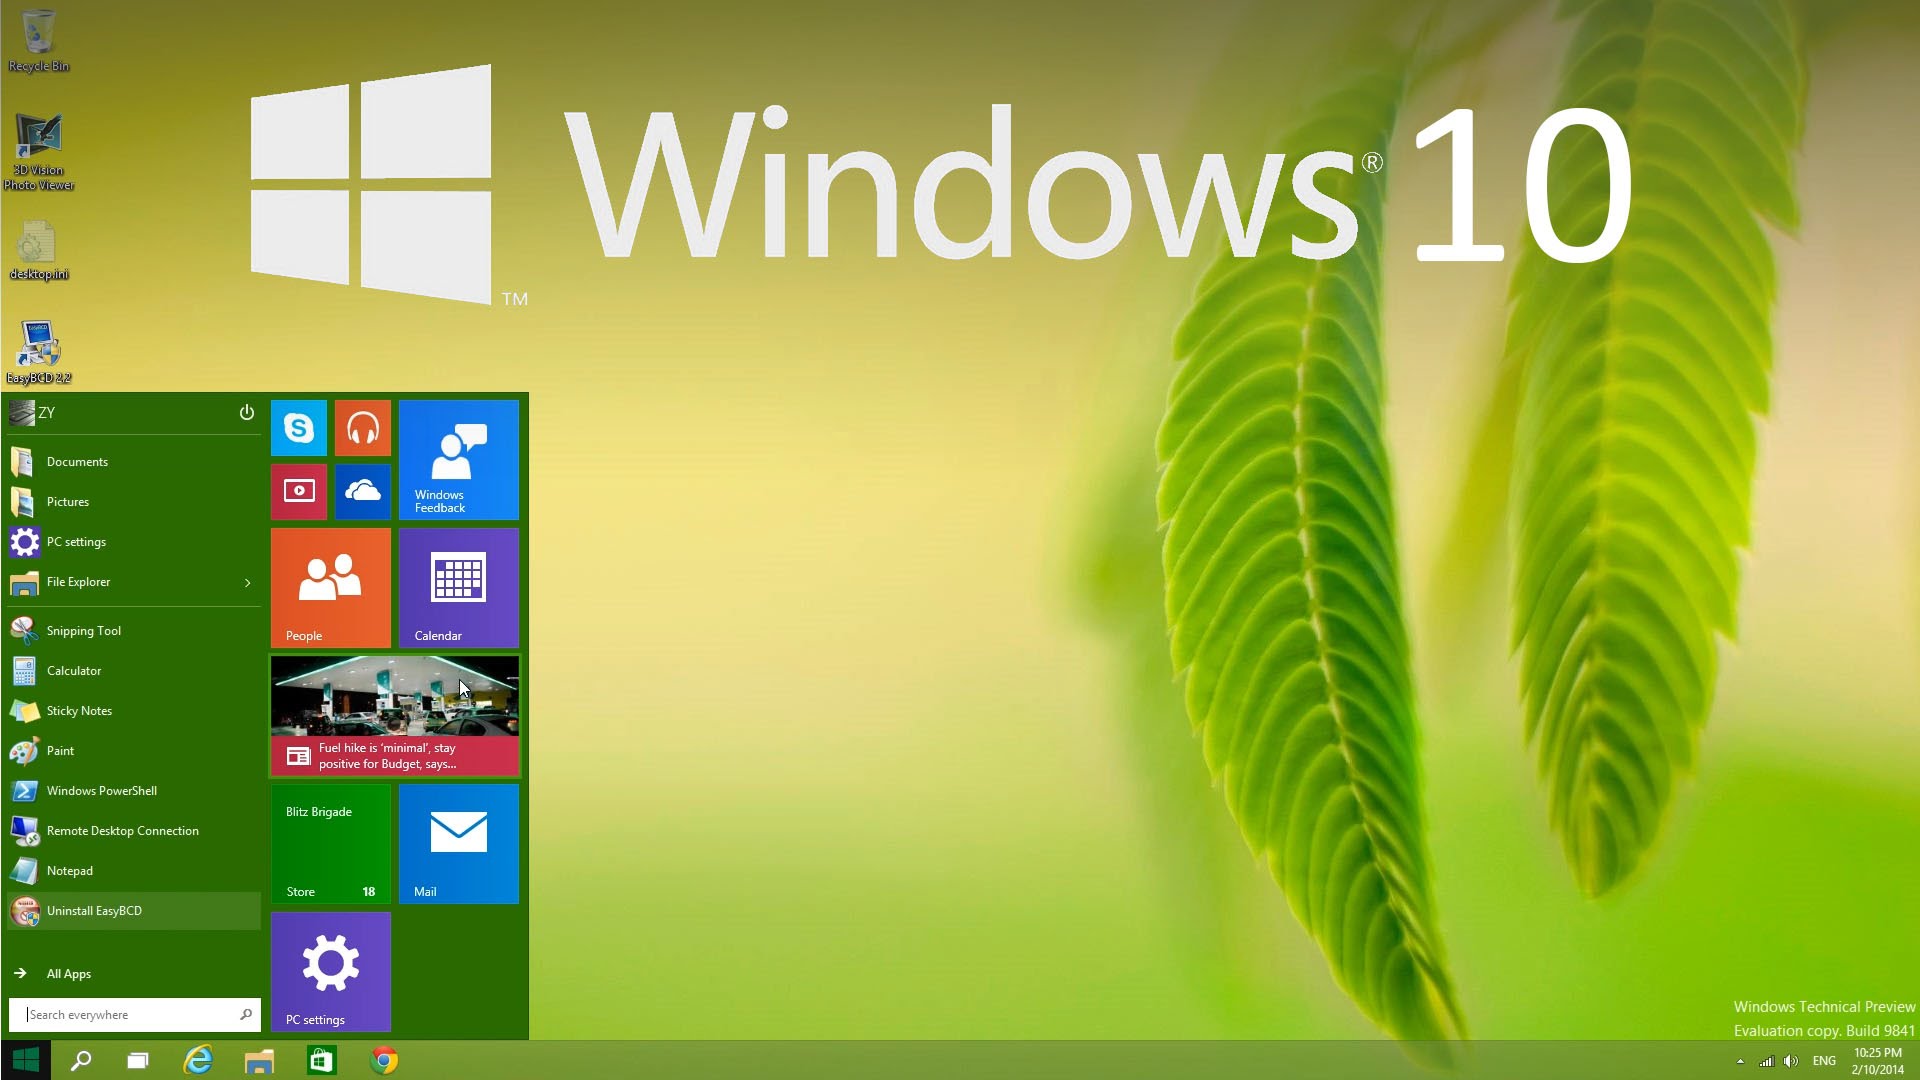 What to expect from windows 10